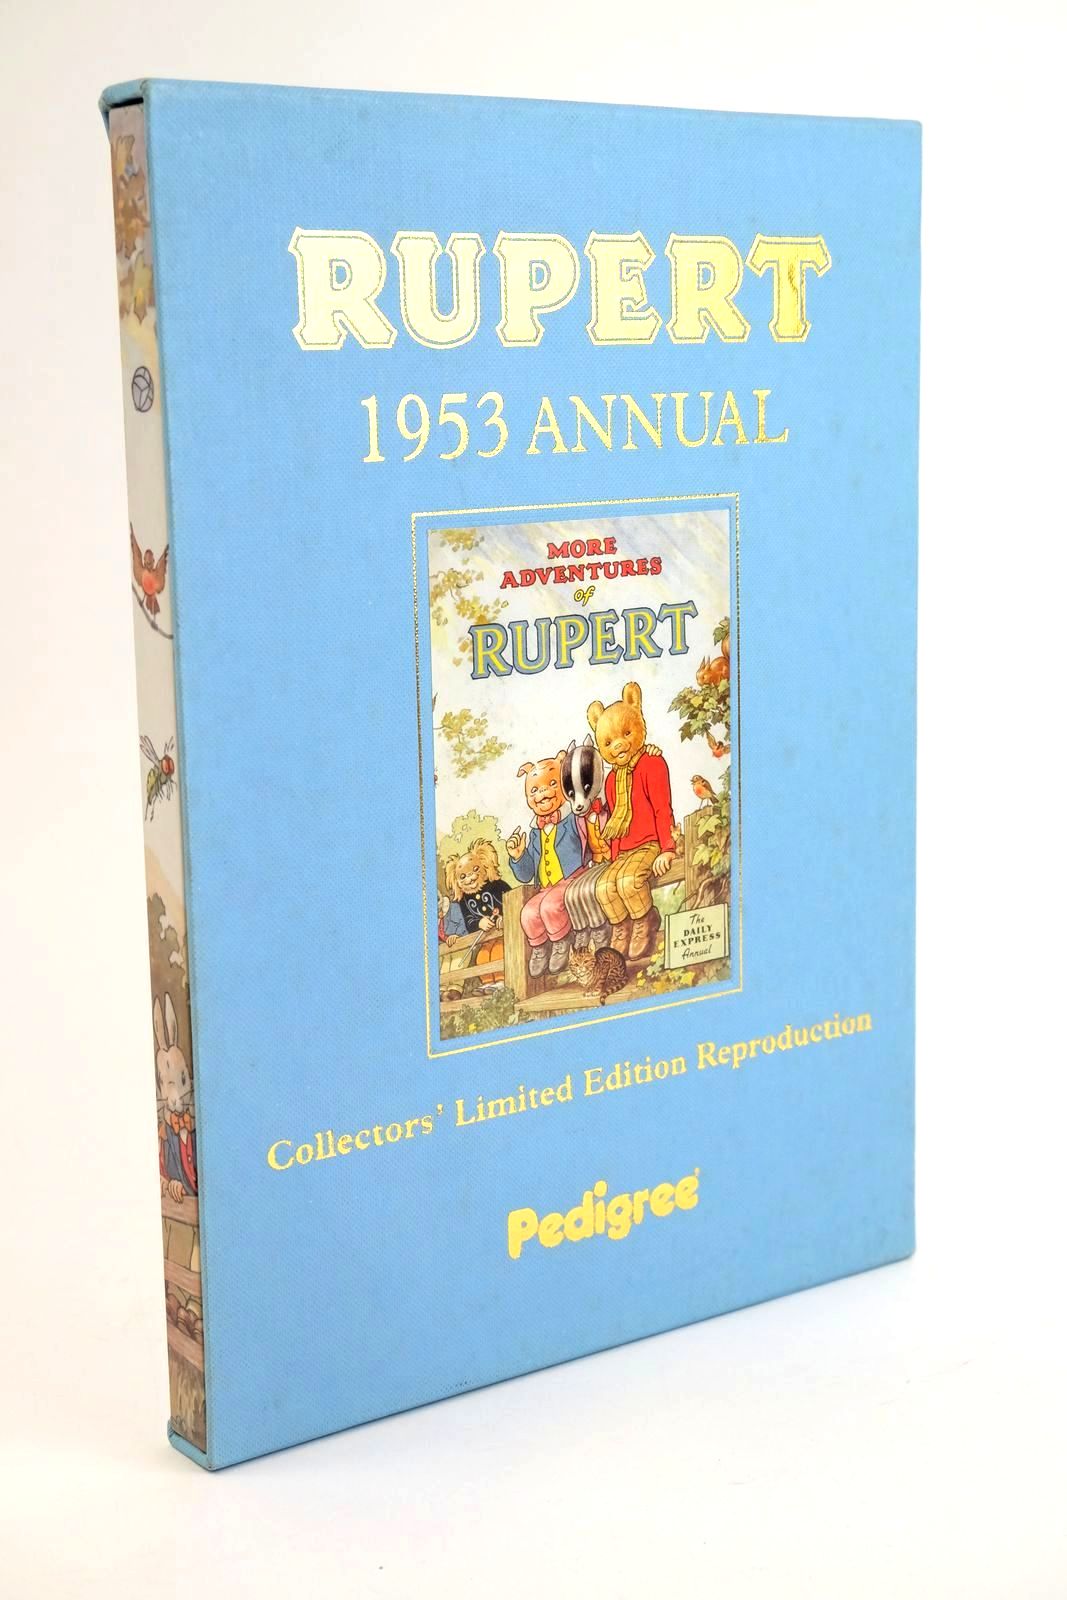 Photo of RUPERT ANNUAL 1953 (FACSIMILE) - MORE ADVENTURES OF RUPERT written by Bestall, Alfred illustrated by Bestall, Alfred published by Pedigree Books Limited (STOCK CODE: 1323418)  for sale by Stella & Rose's Books